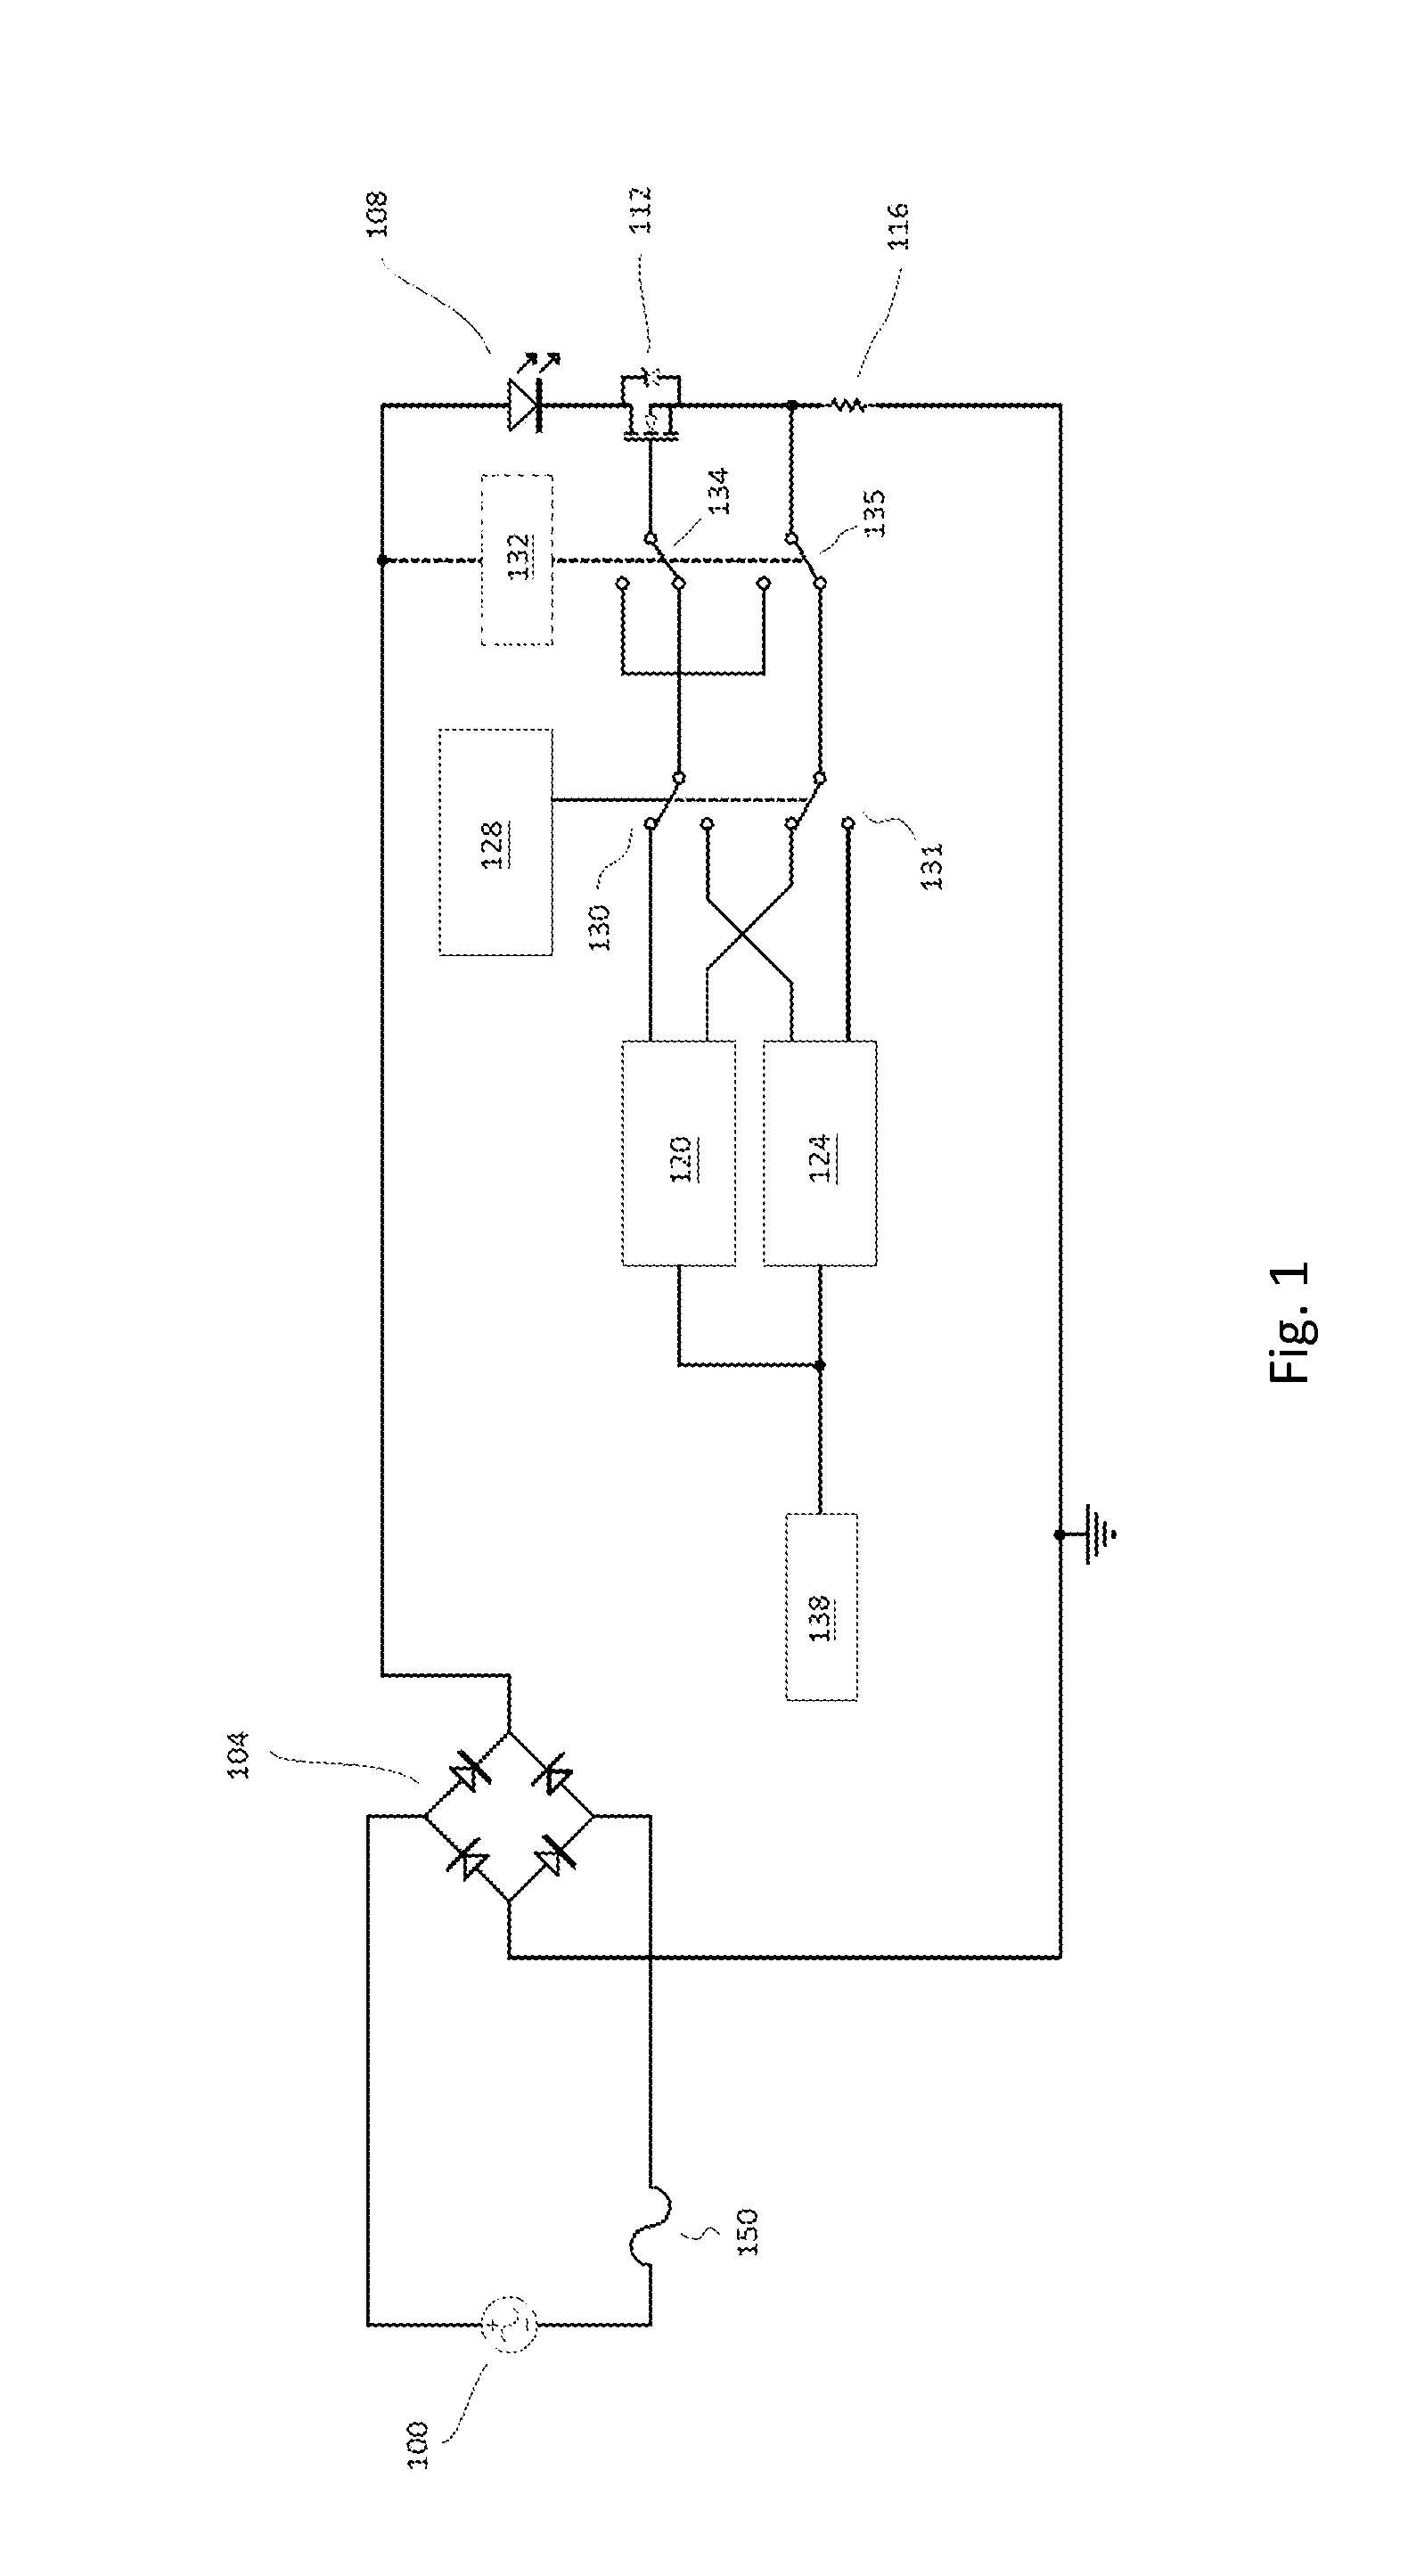 Half- Or Quarter-Cycle Current Regulator For Non-Isolated, Line Voltage L.E.D. Ballast Circuits